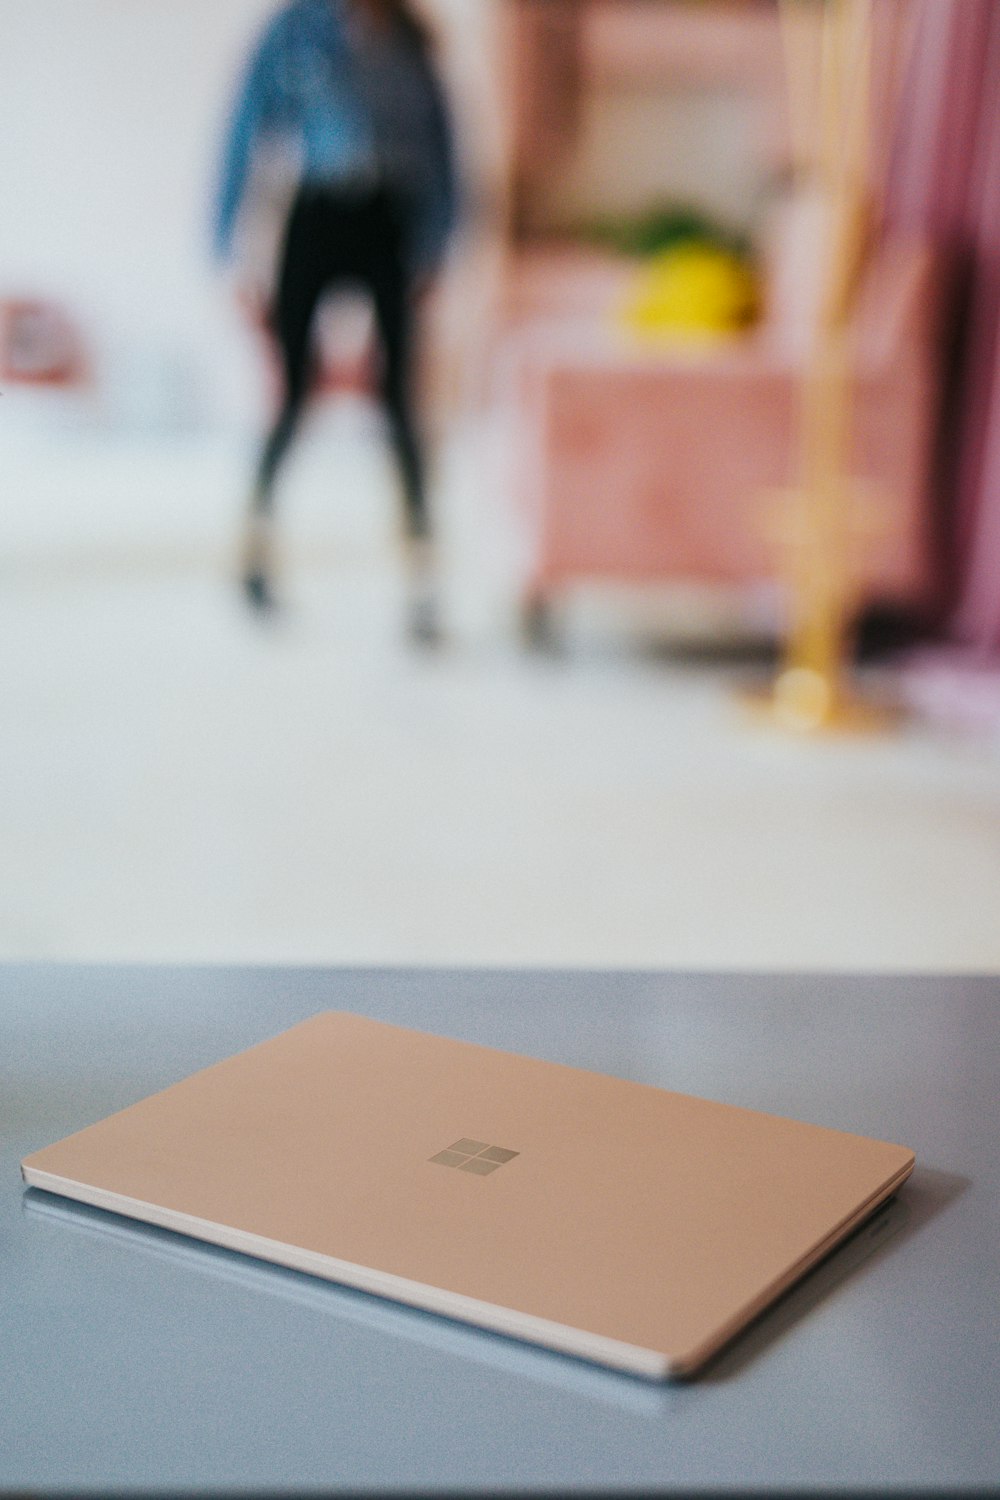 Microsoft Surface laptop on gray table